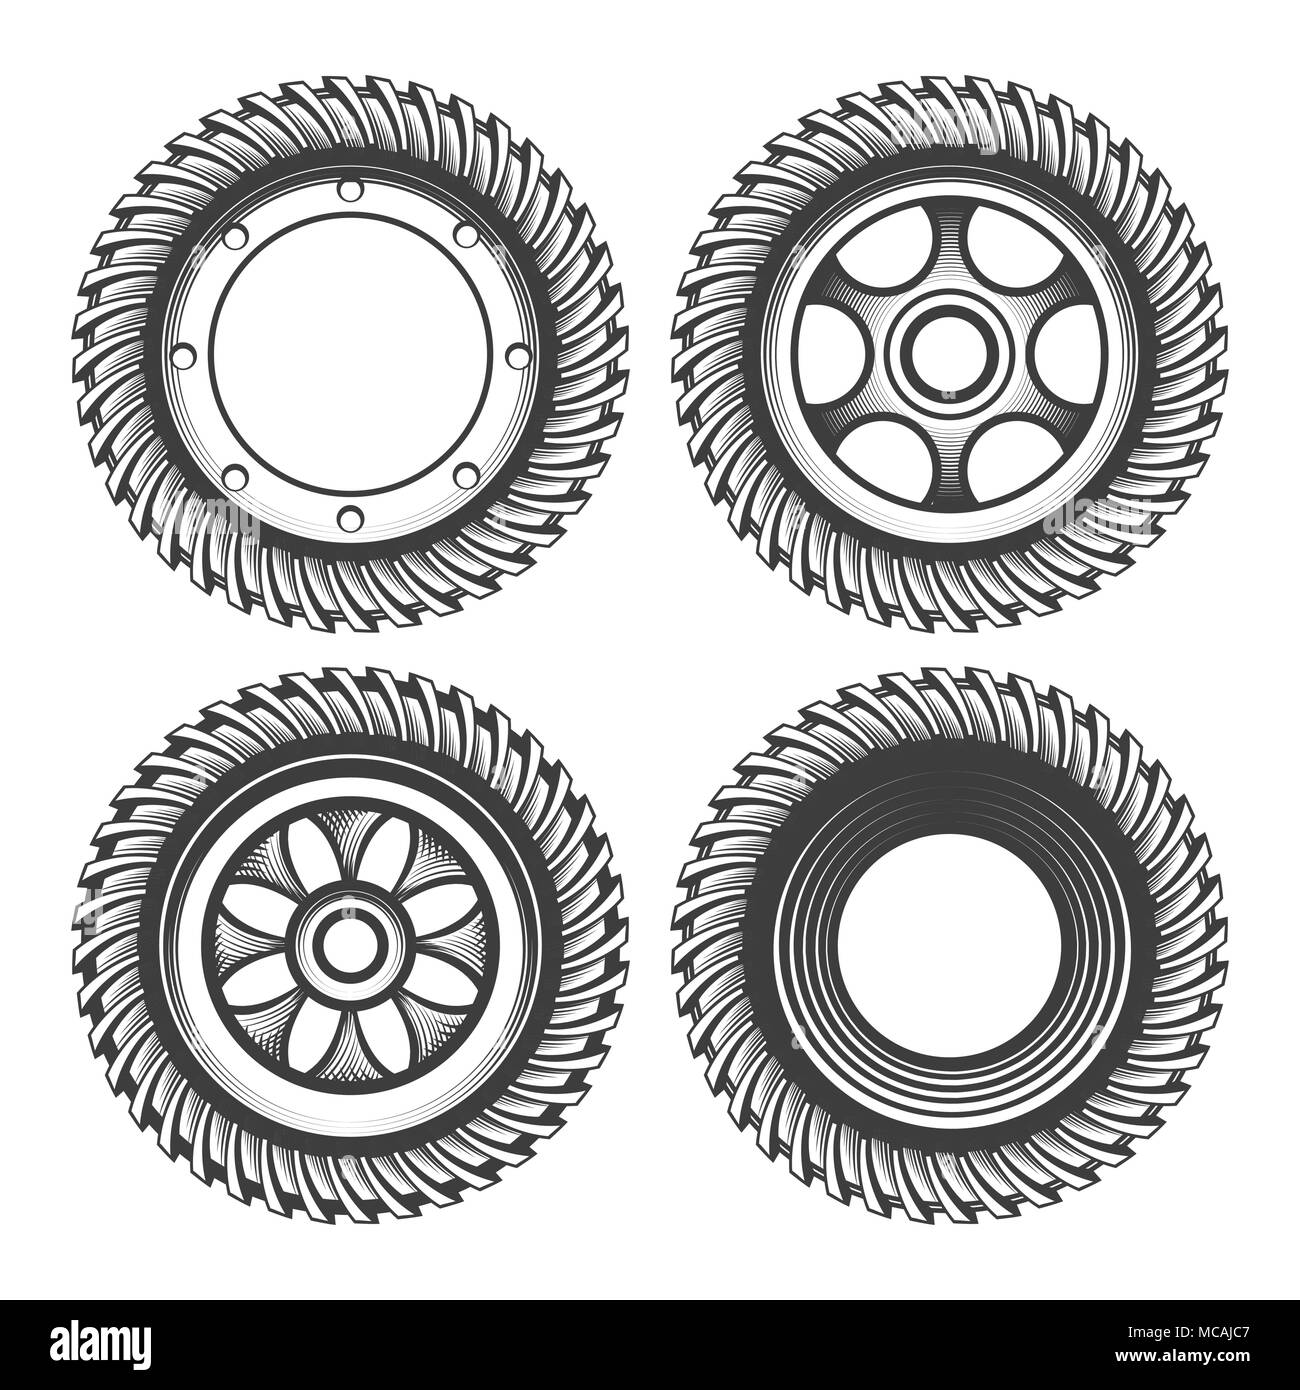 Hand drawn set of gear wheels in engraving style isolated on white. Vector illustration. Stock Vector